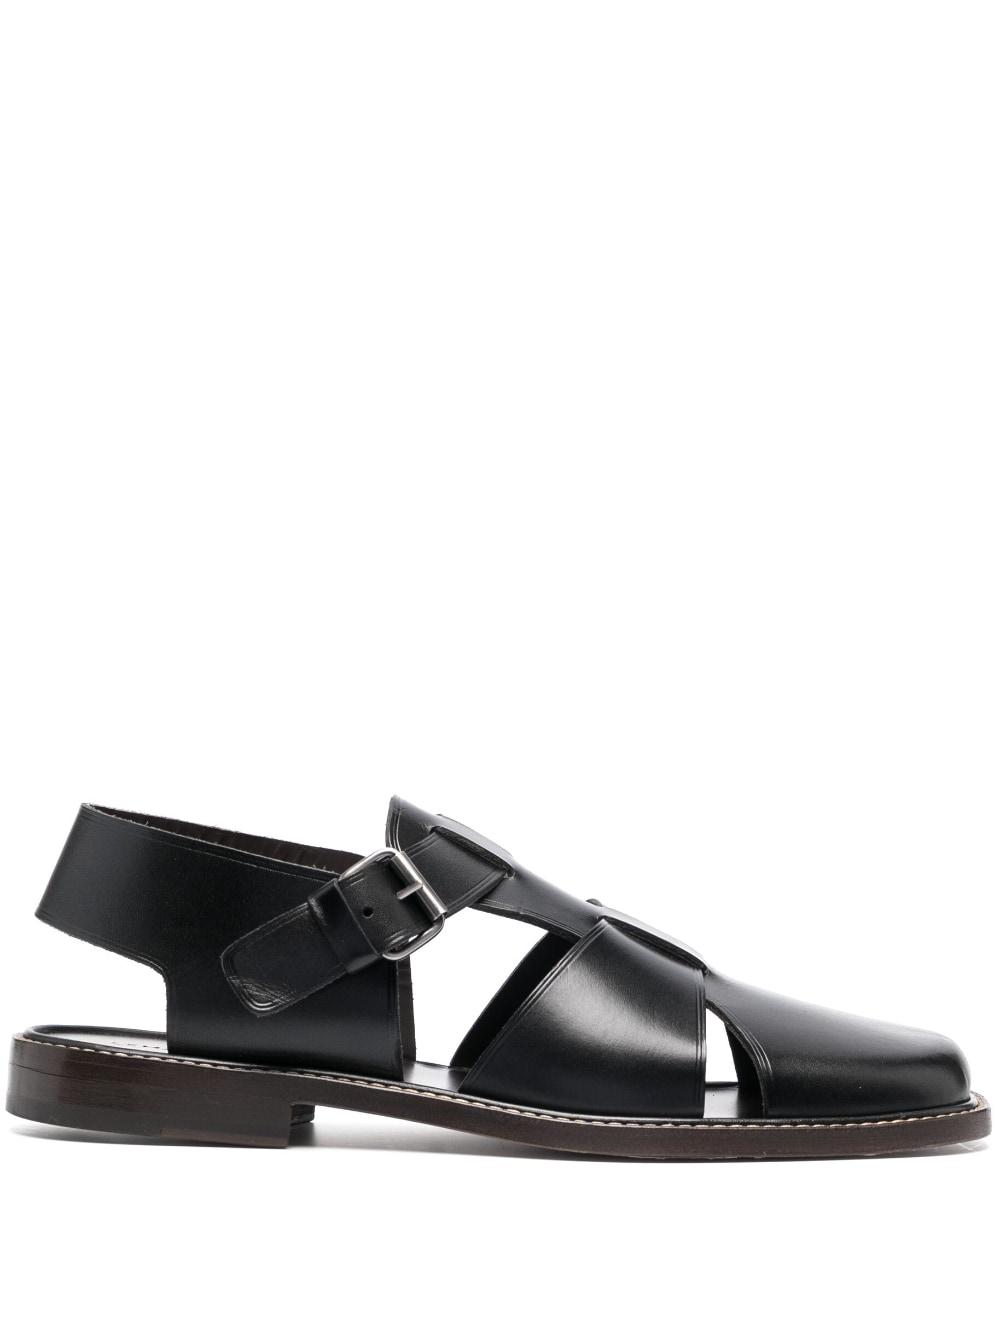 Lemaire Buckled Leather Sandals in Black for Men | Lyst